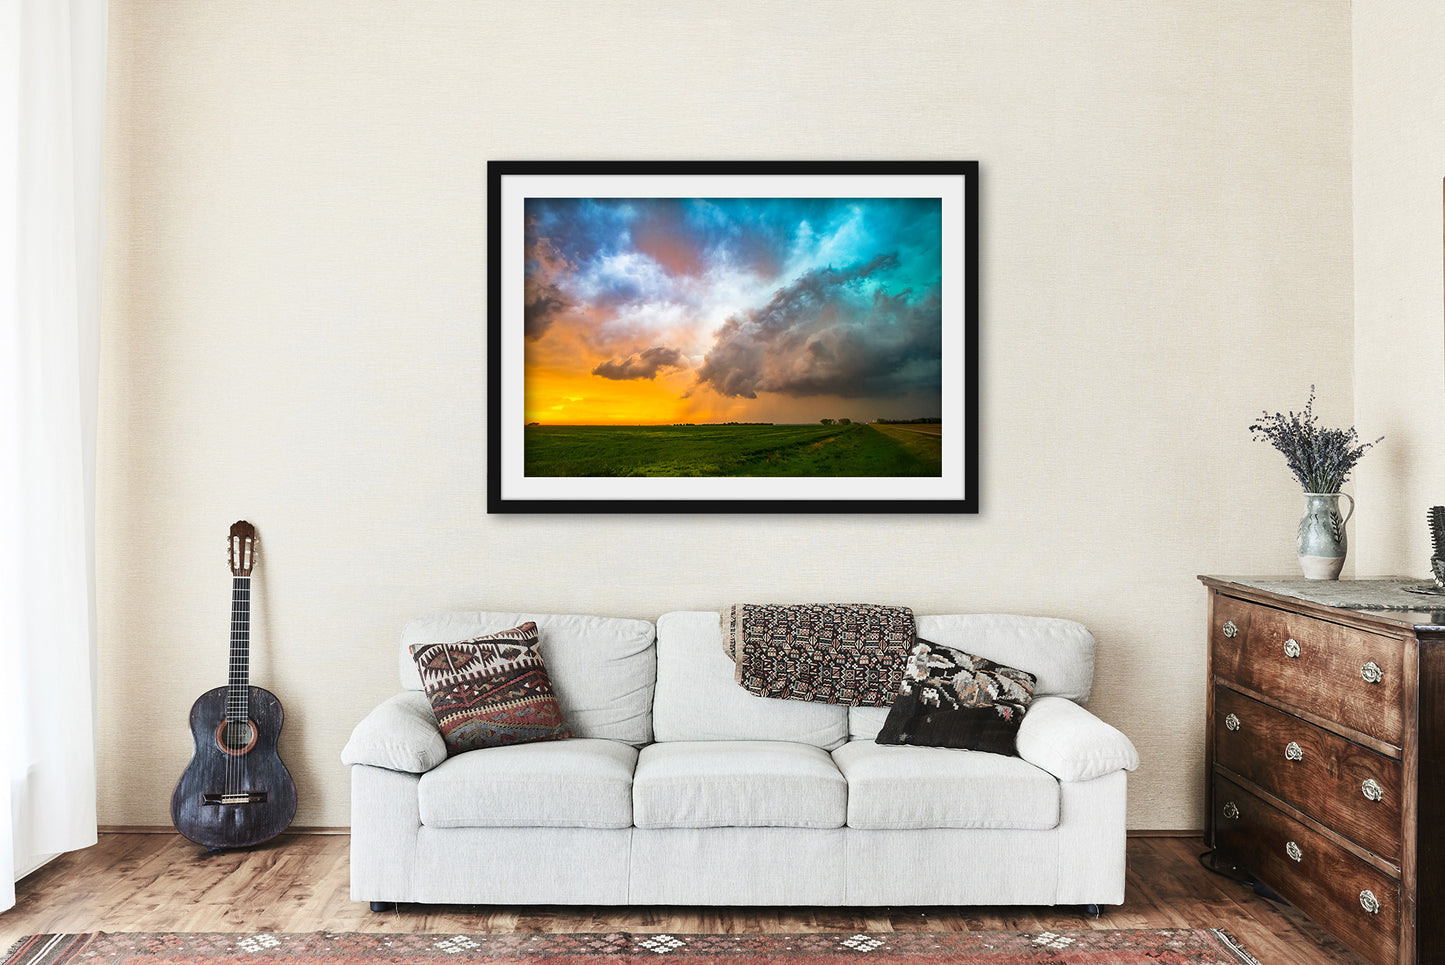 Framed and Matted Print - Picture of Colorful Storm Clouds at Sunset on Spring Evening in Kansas - Thunderstorm Wall Art Weather Decor